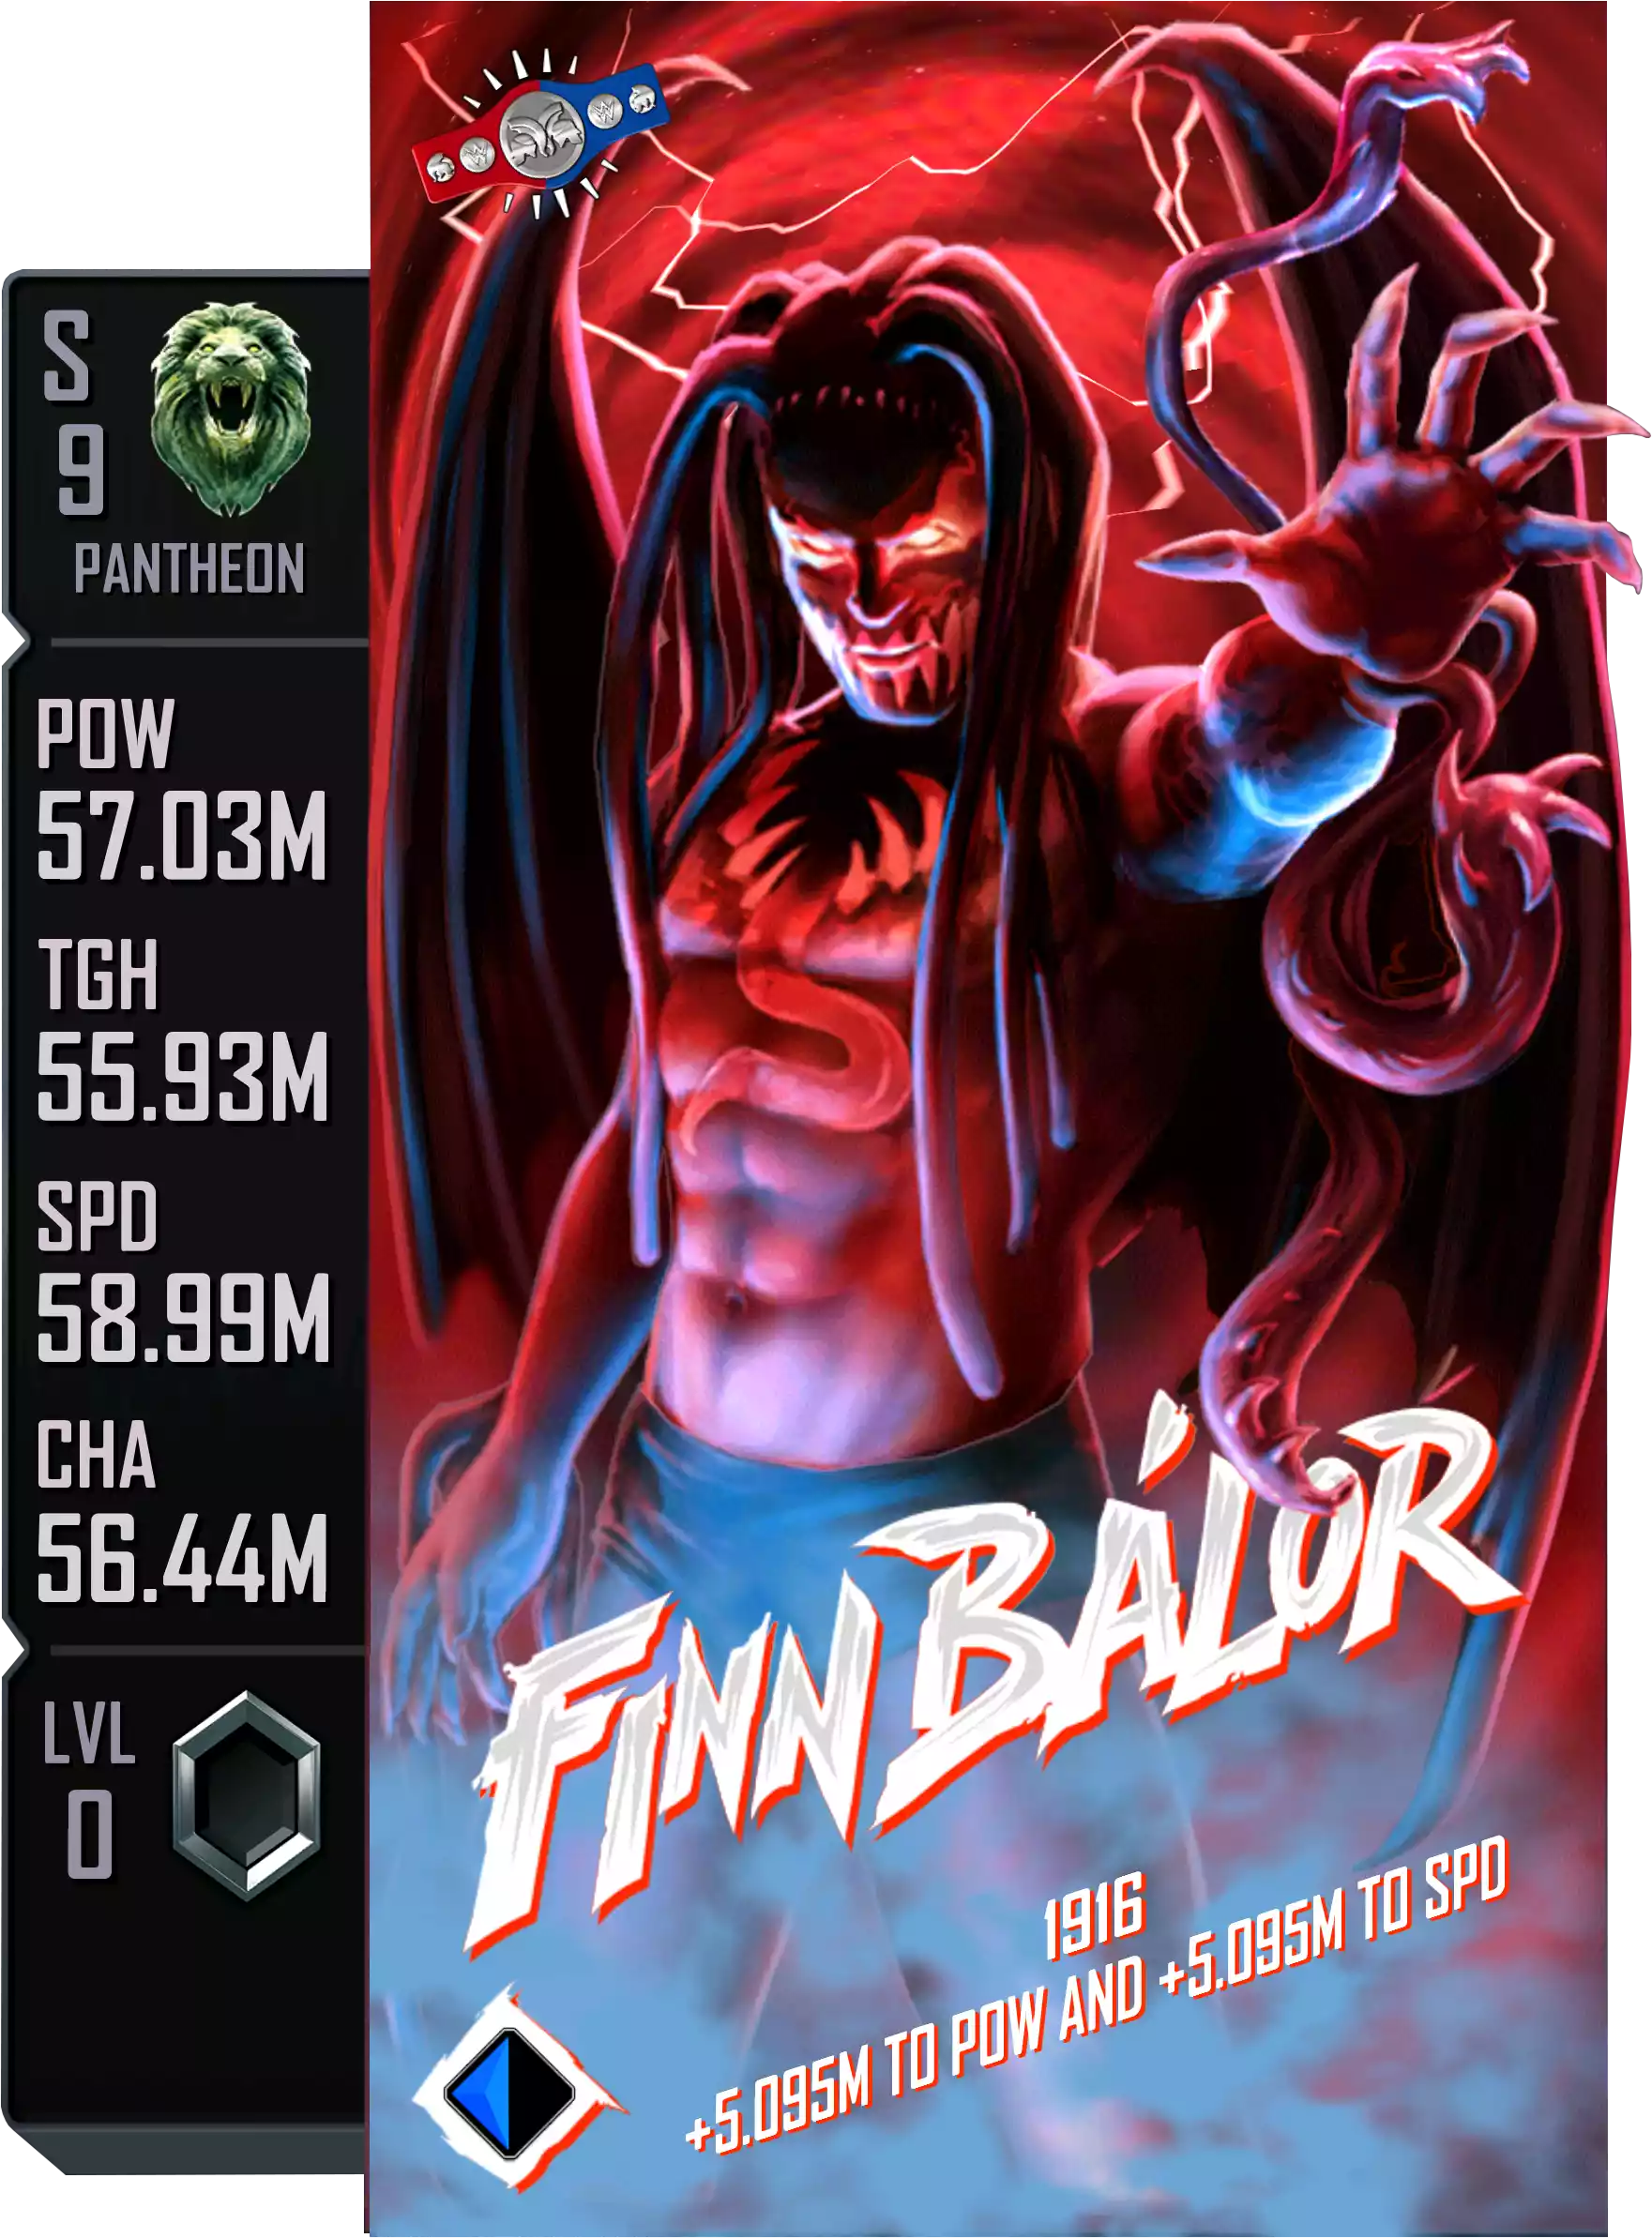 Pantheon, Finn Balor, SE (Special Edition) Card from WWE Supercard